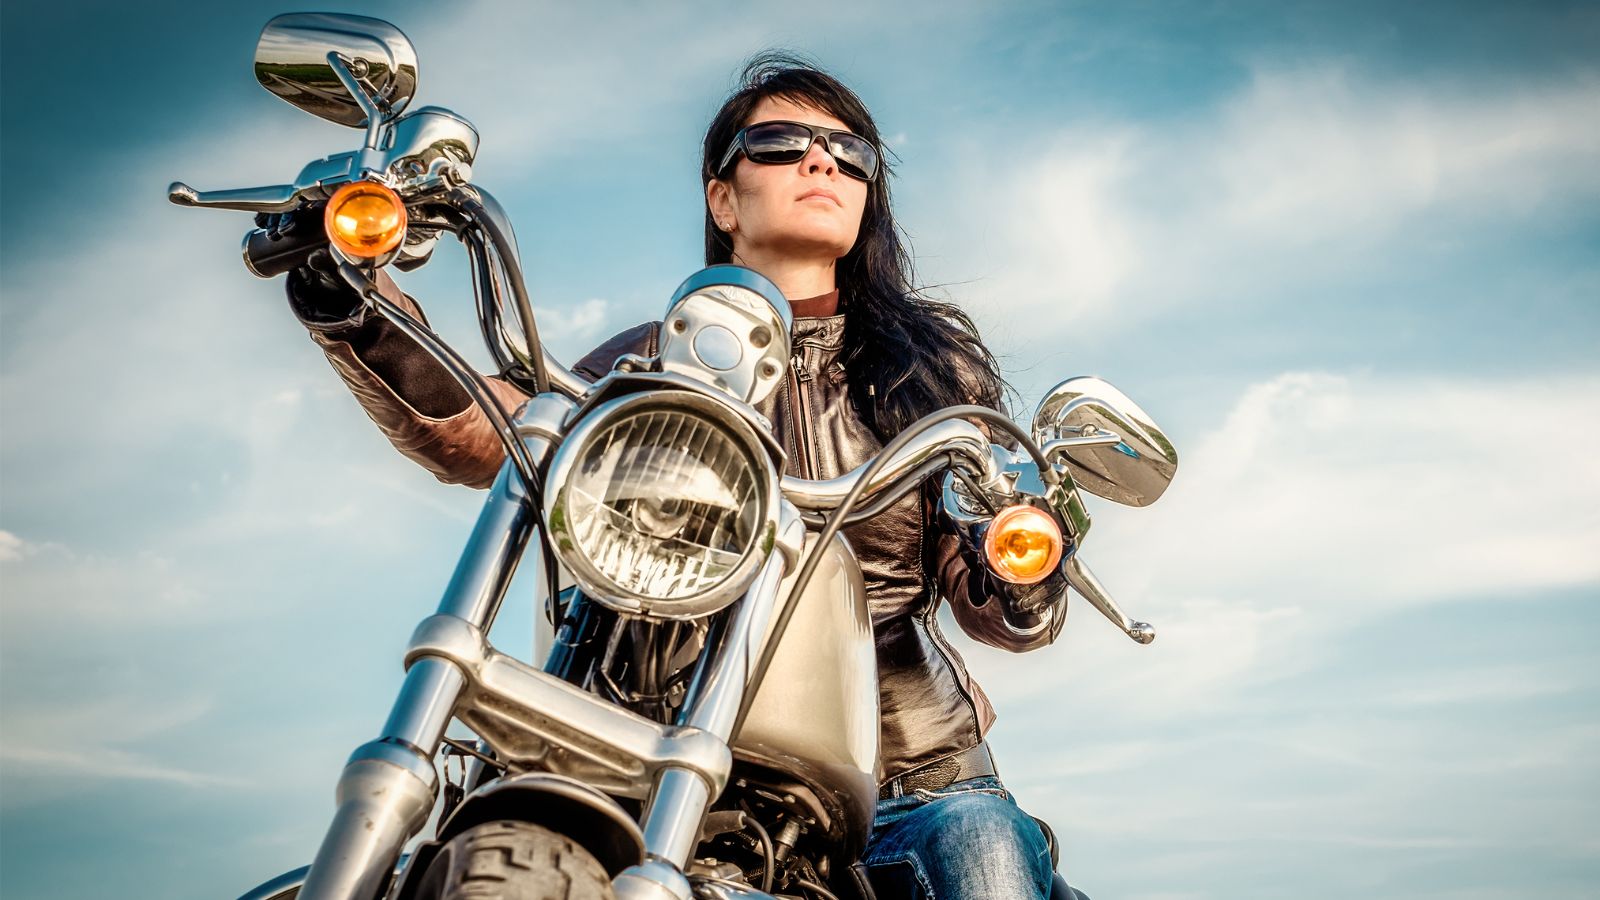 12 Essential Skills Every Female Motorcyclist Should Master: A Comprehensive Guide